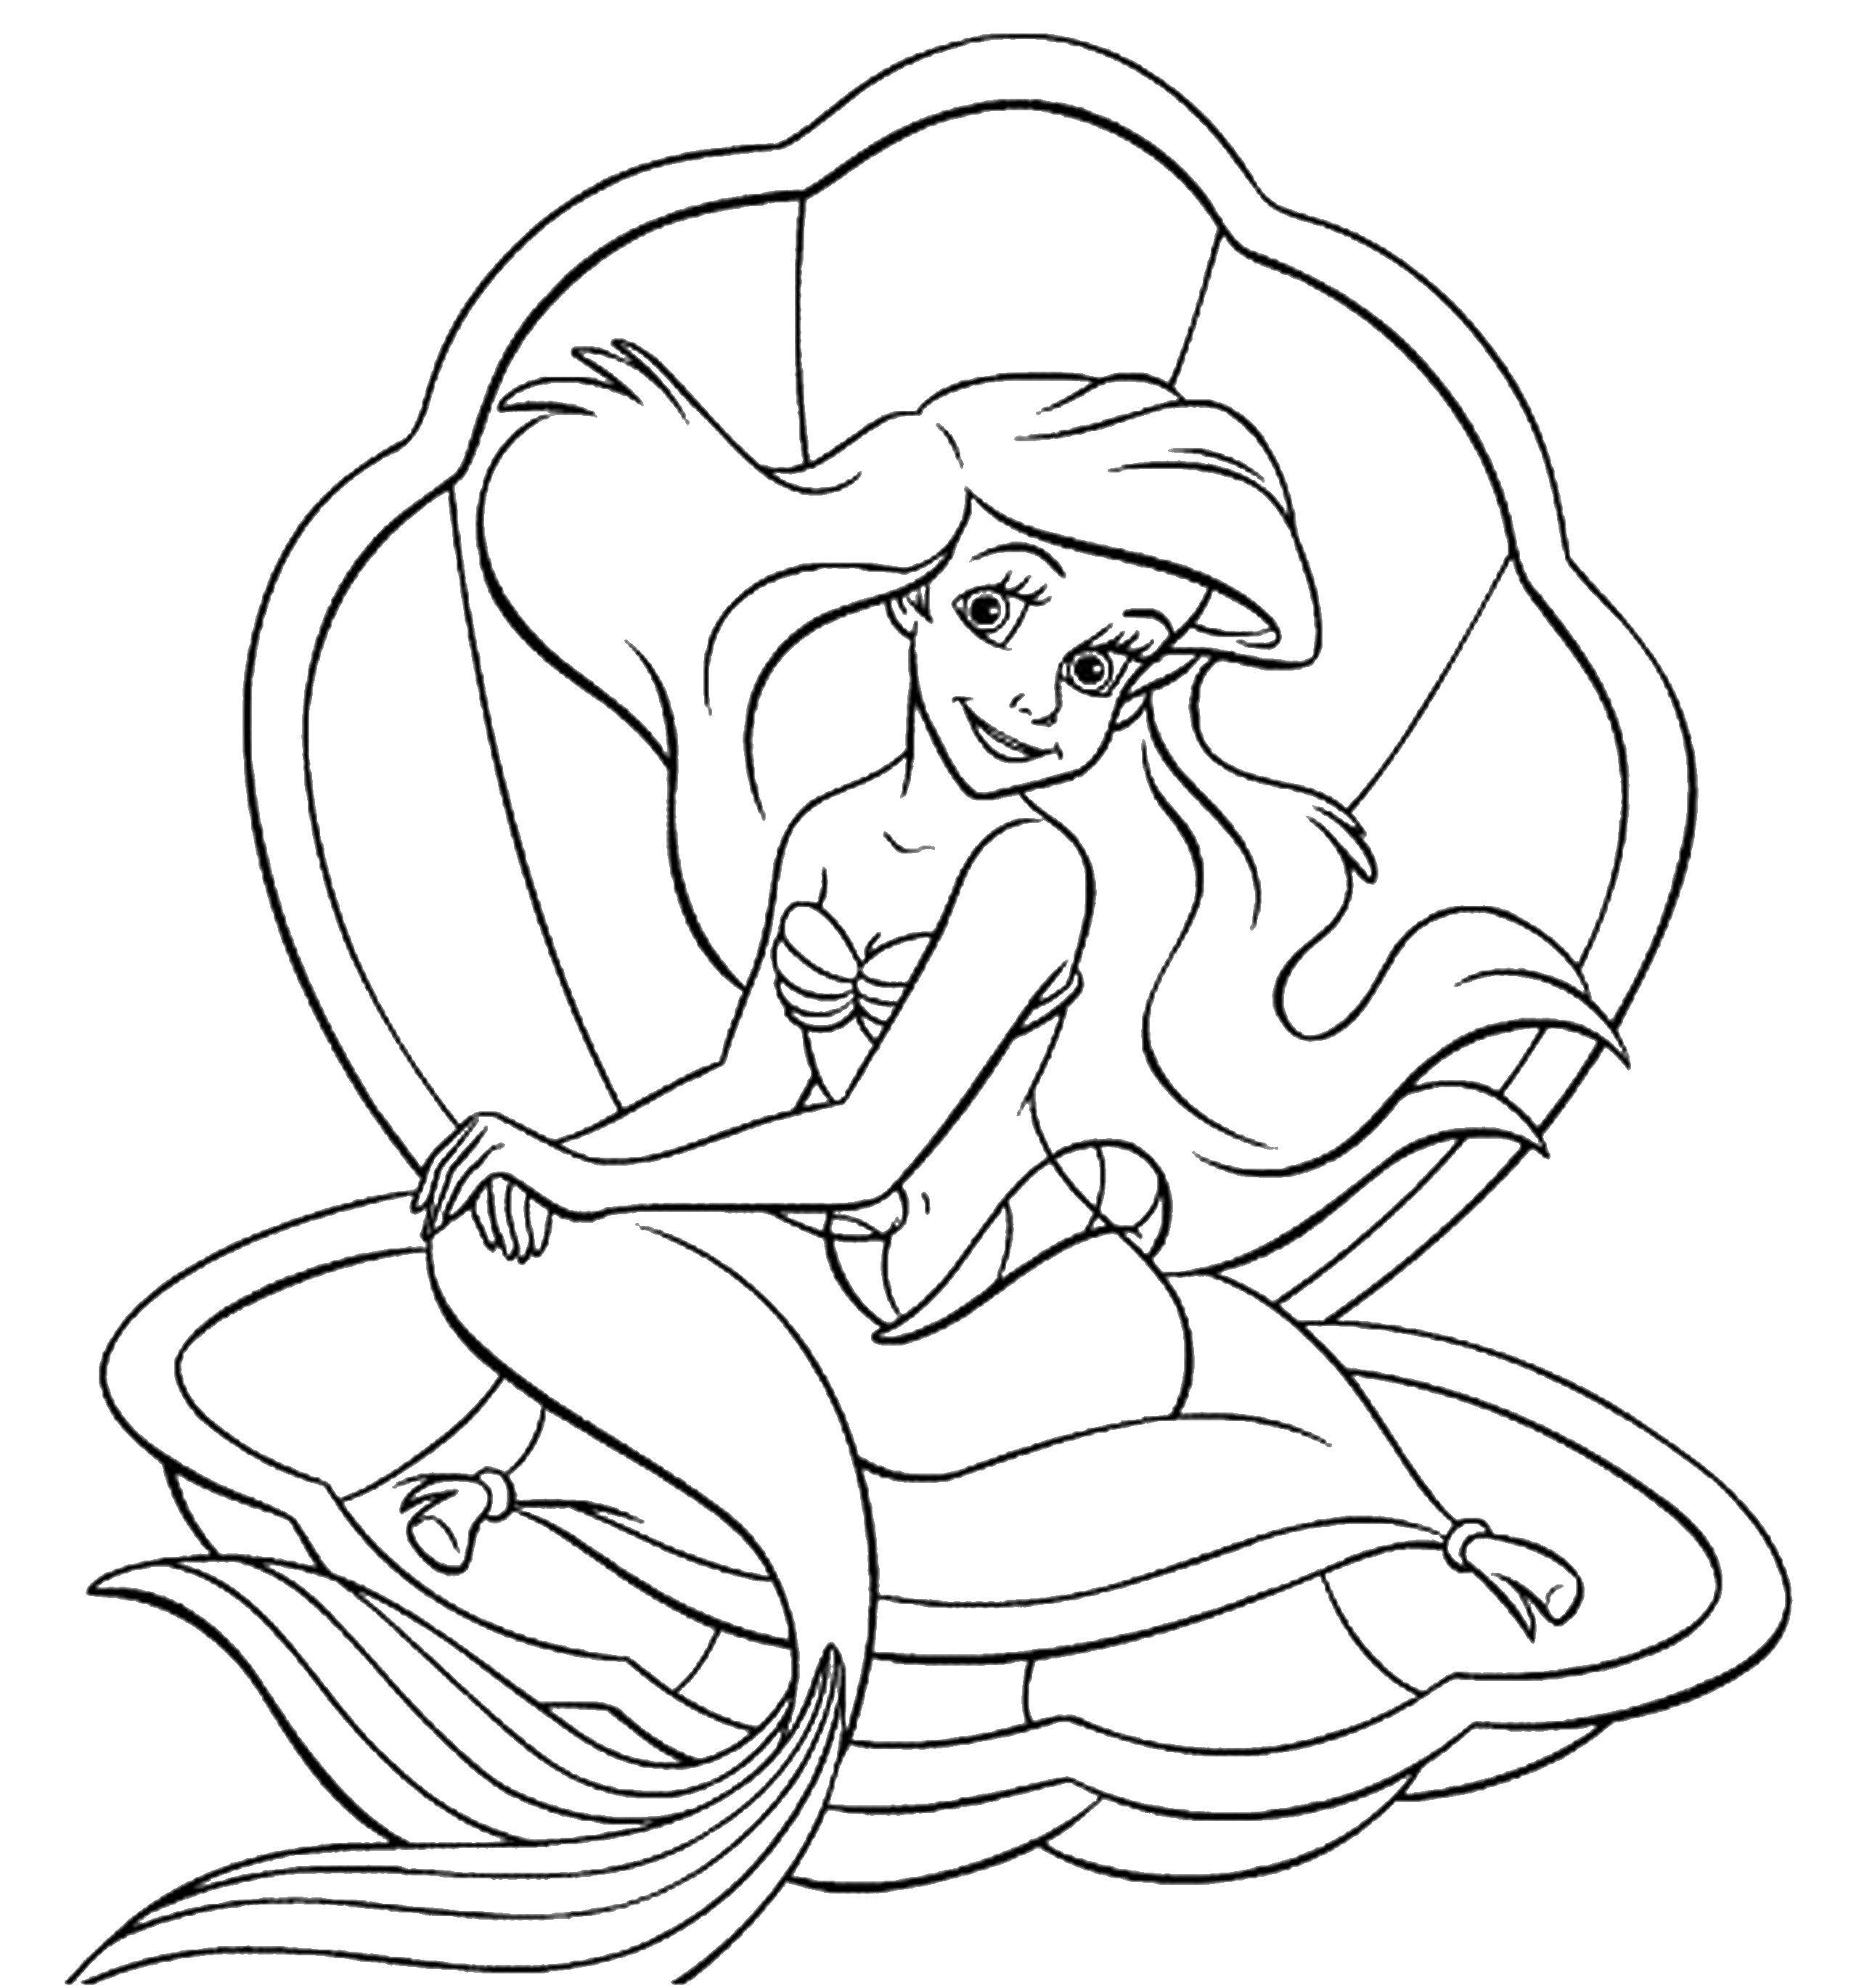 Coloring Ariel in a shell. Category The little mermaid. Tags:  the little mermaid, Ariel, tail, shell.